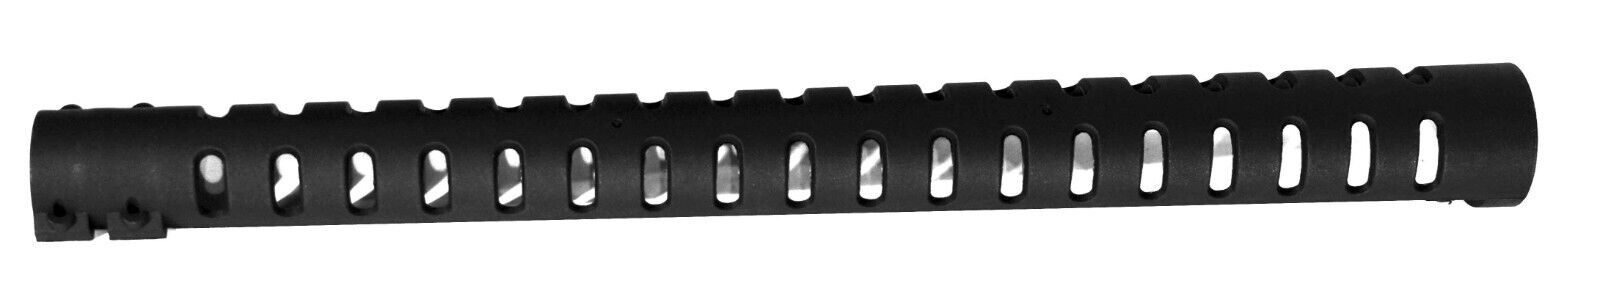 Polymer Heat Shield For Ithaca 12 gauge smooth barrels tactical hunting home defense. - TRINITY SUPPLY INC